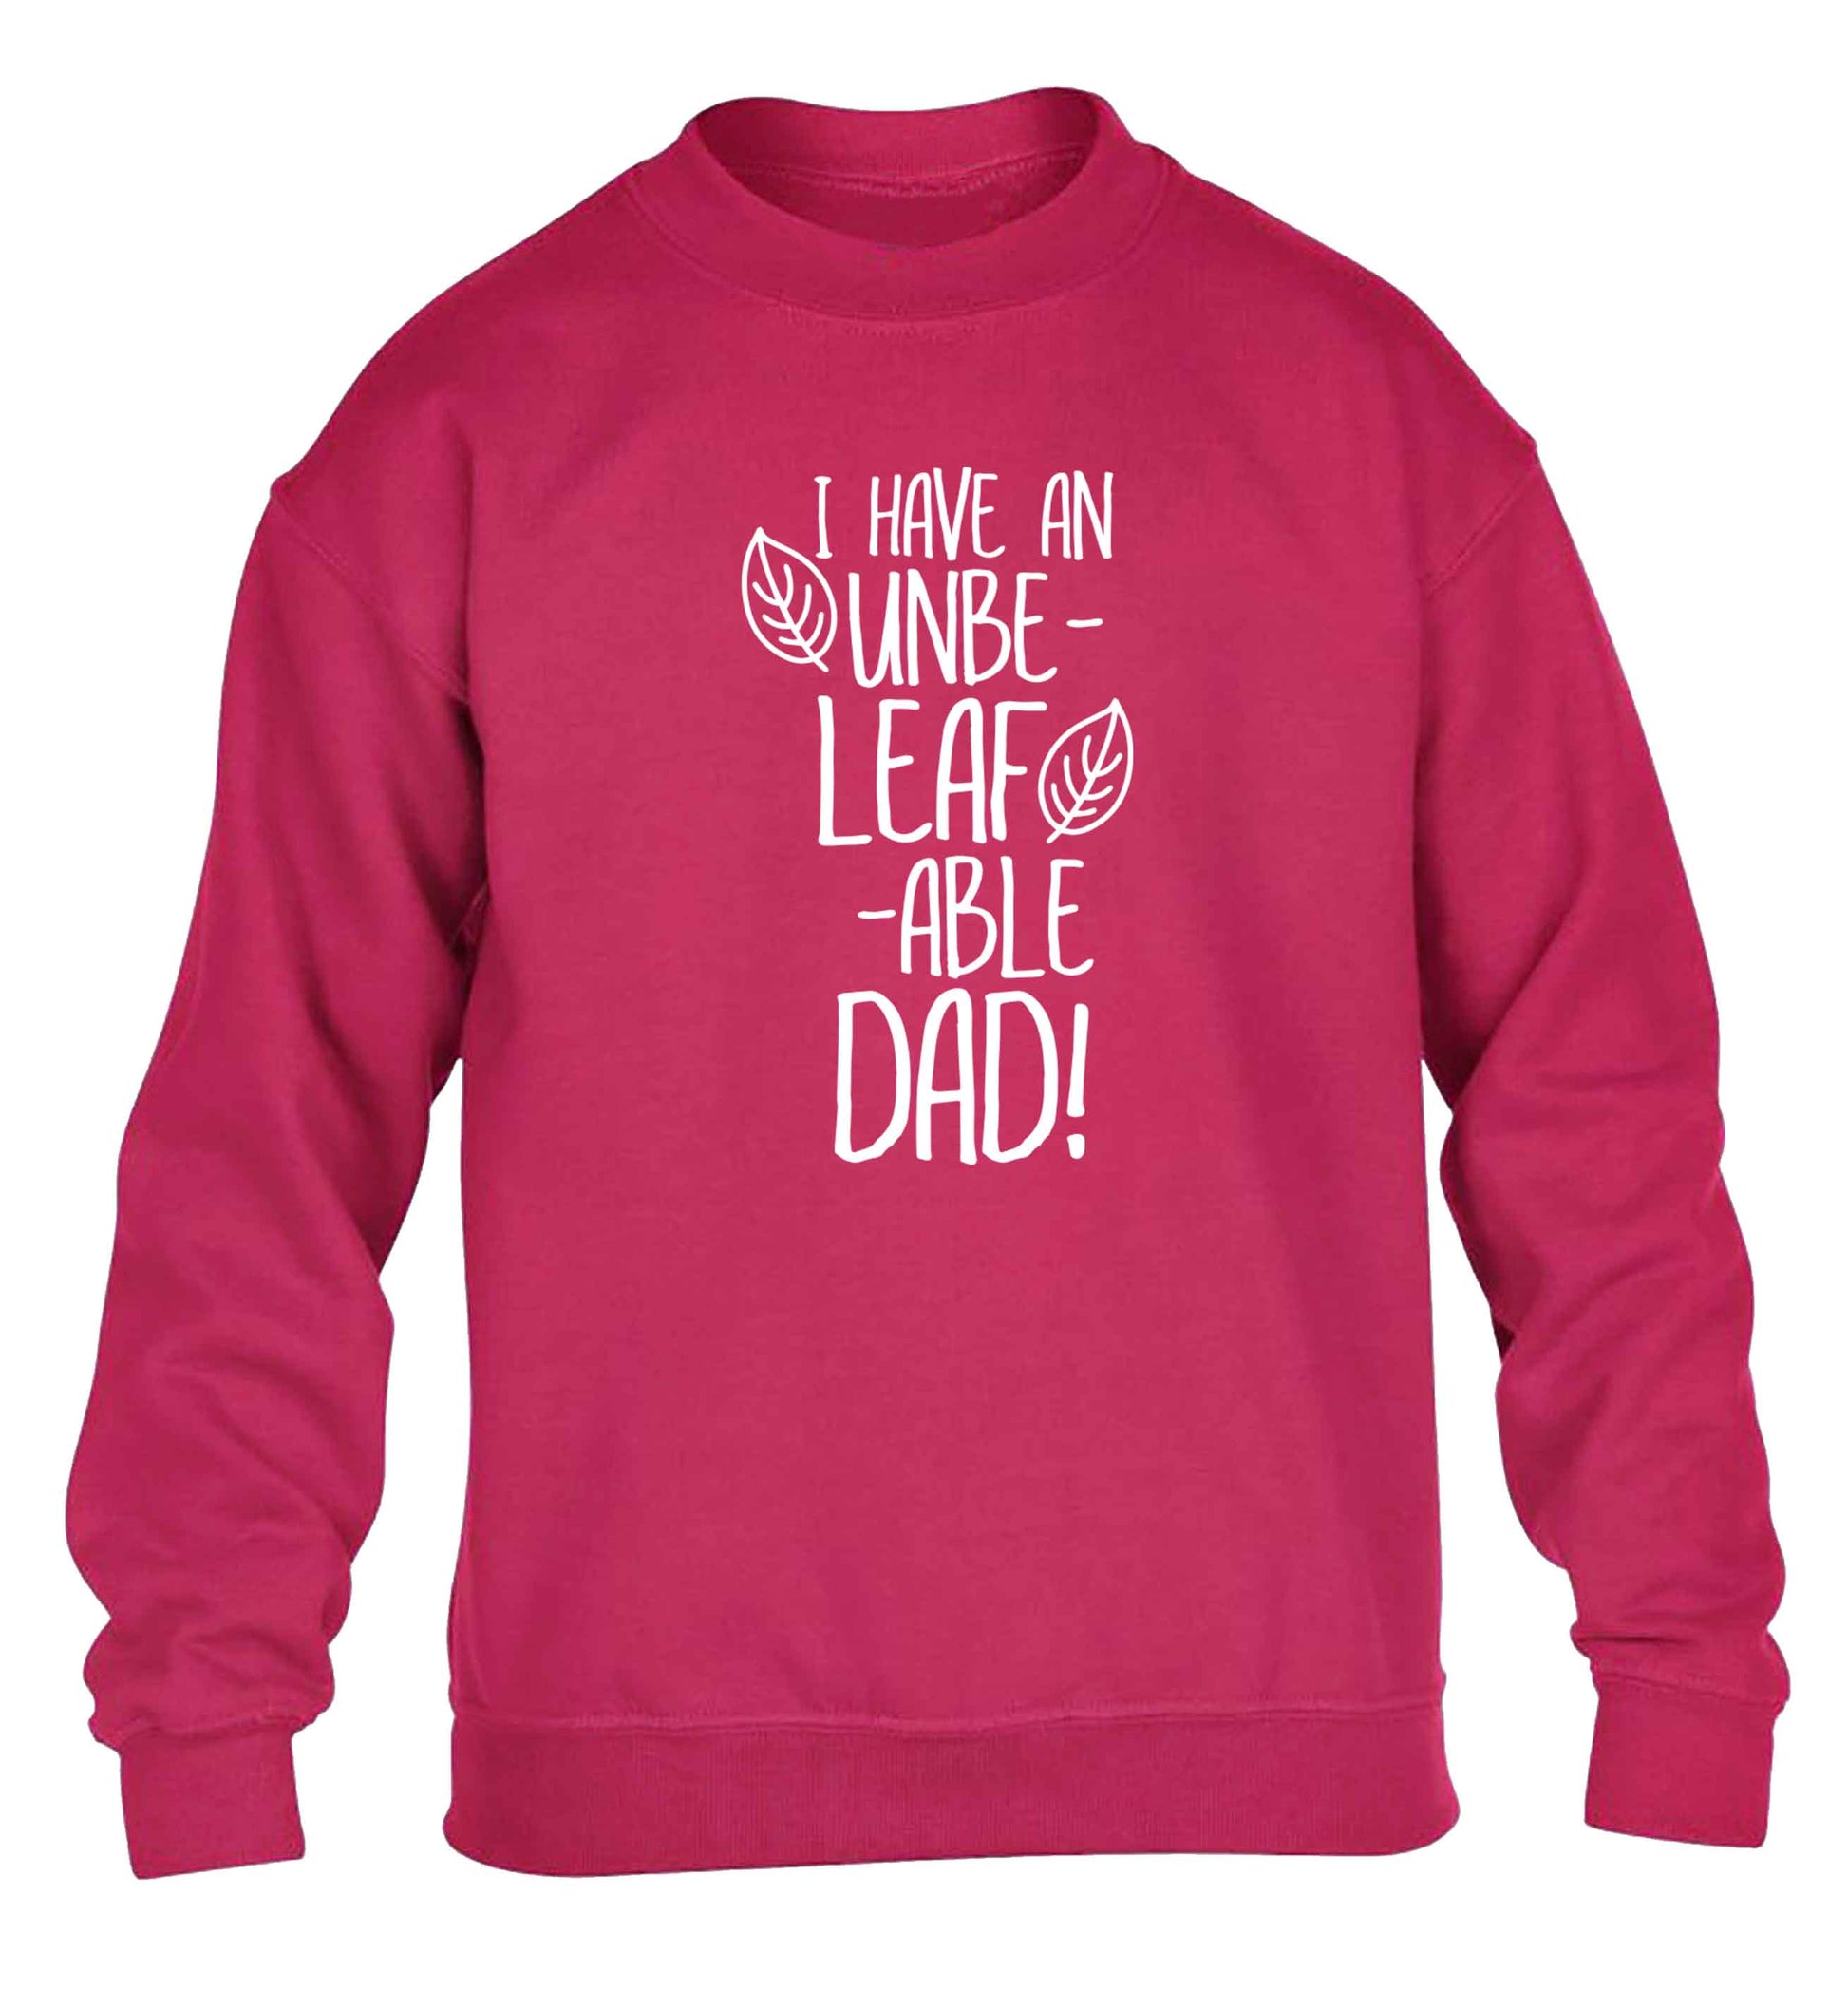 I have an unbe-leaf-able dad children's pink sweater 12-13 Years